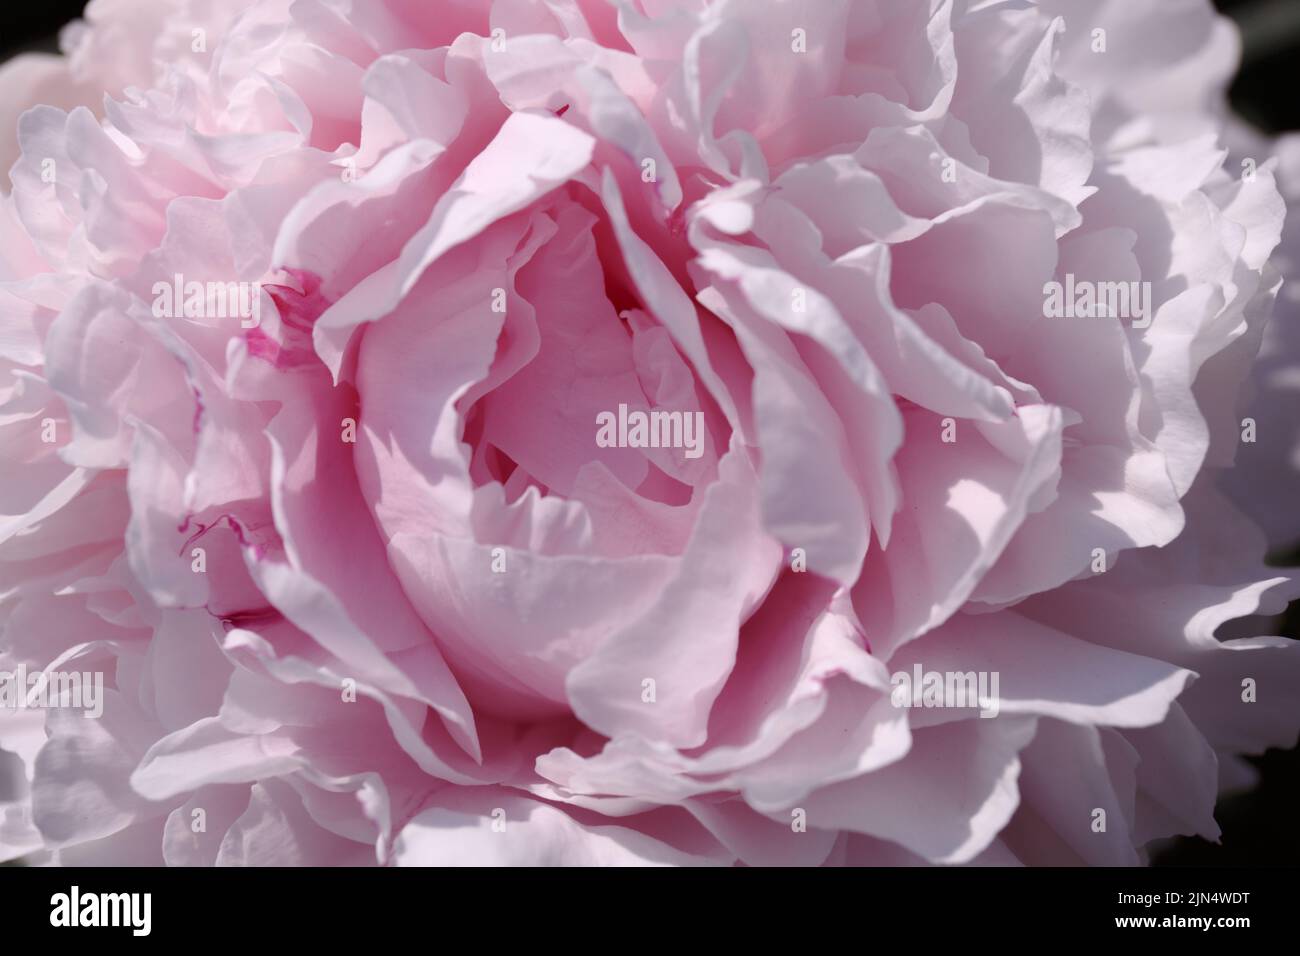 Close-up. Pink peony macro,  petals of a pink peony flower. Banner. Blooming peonies with a double flower texture. Pale pink blooming. Delicate abstra Stock Photo